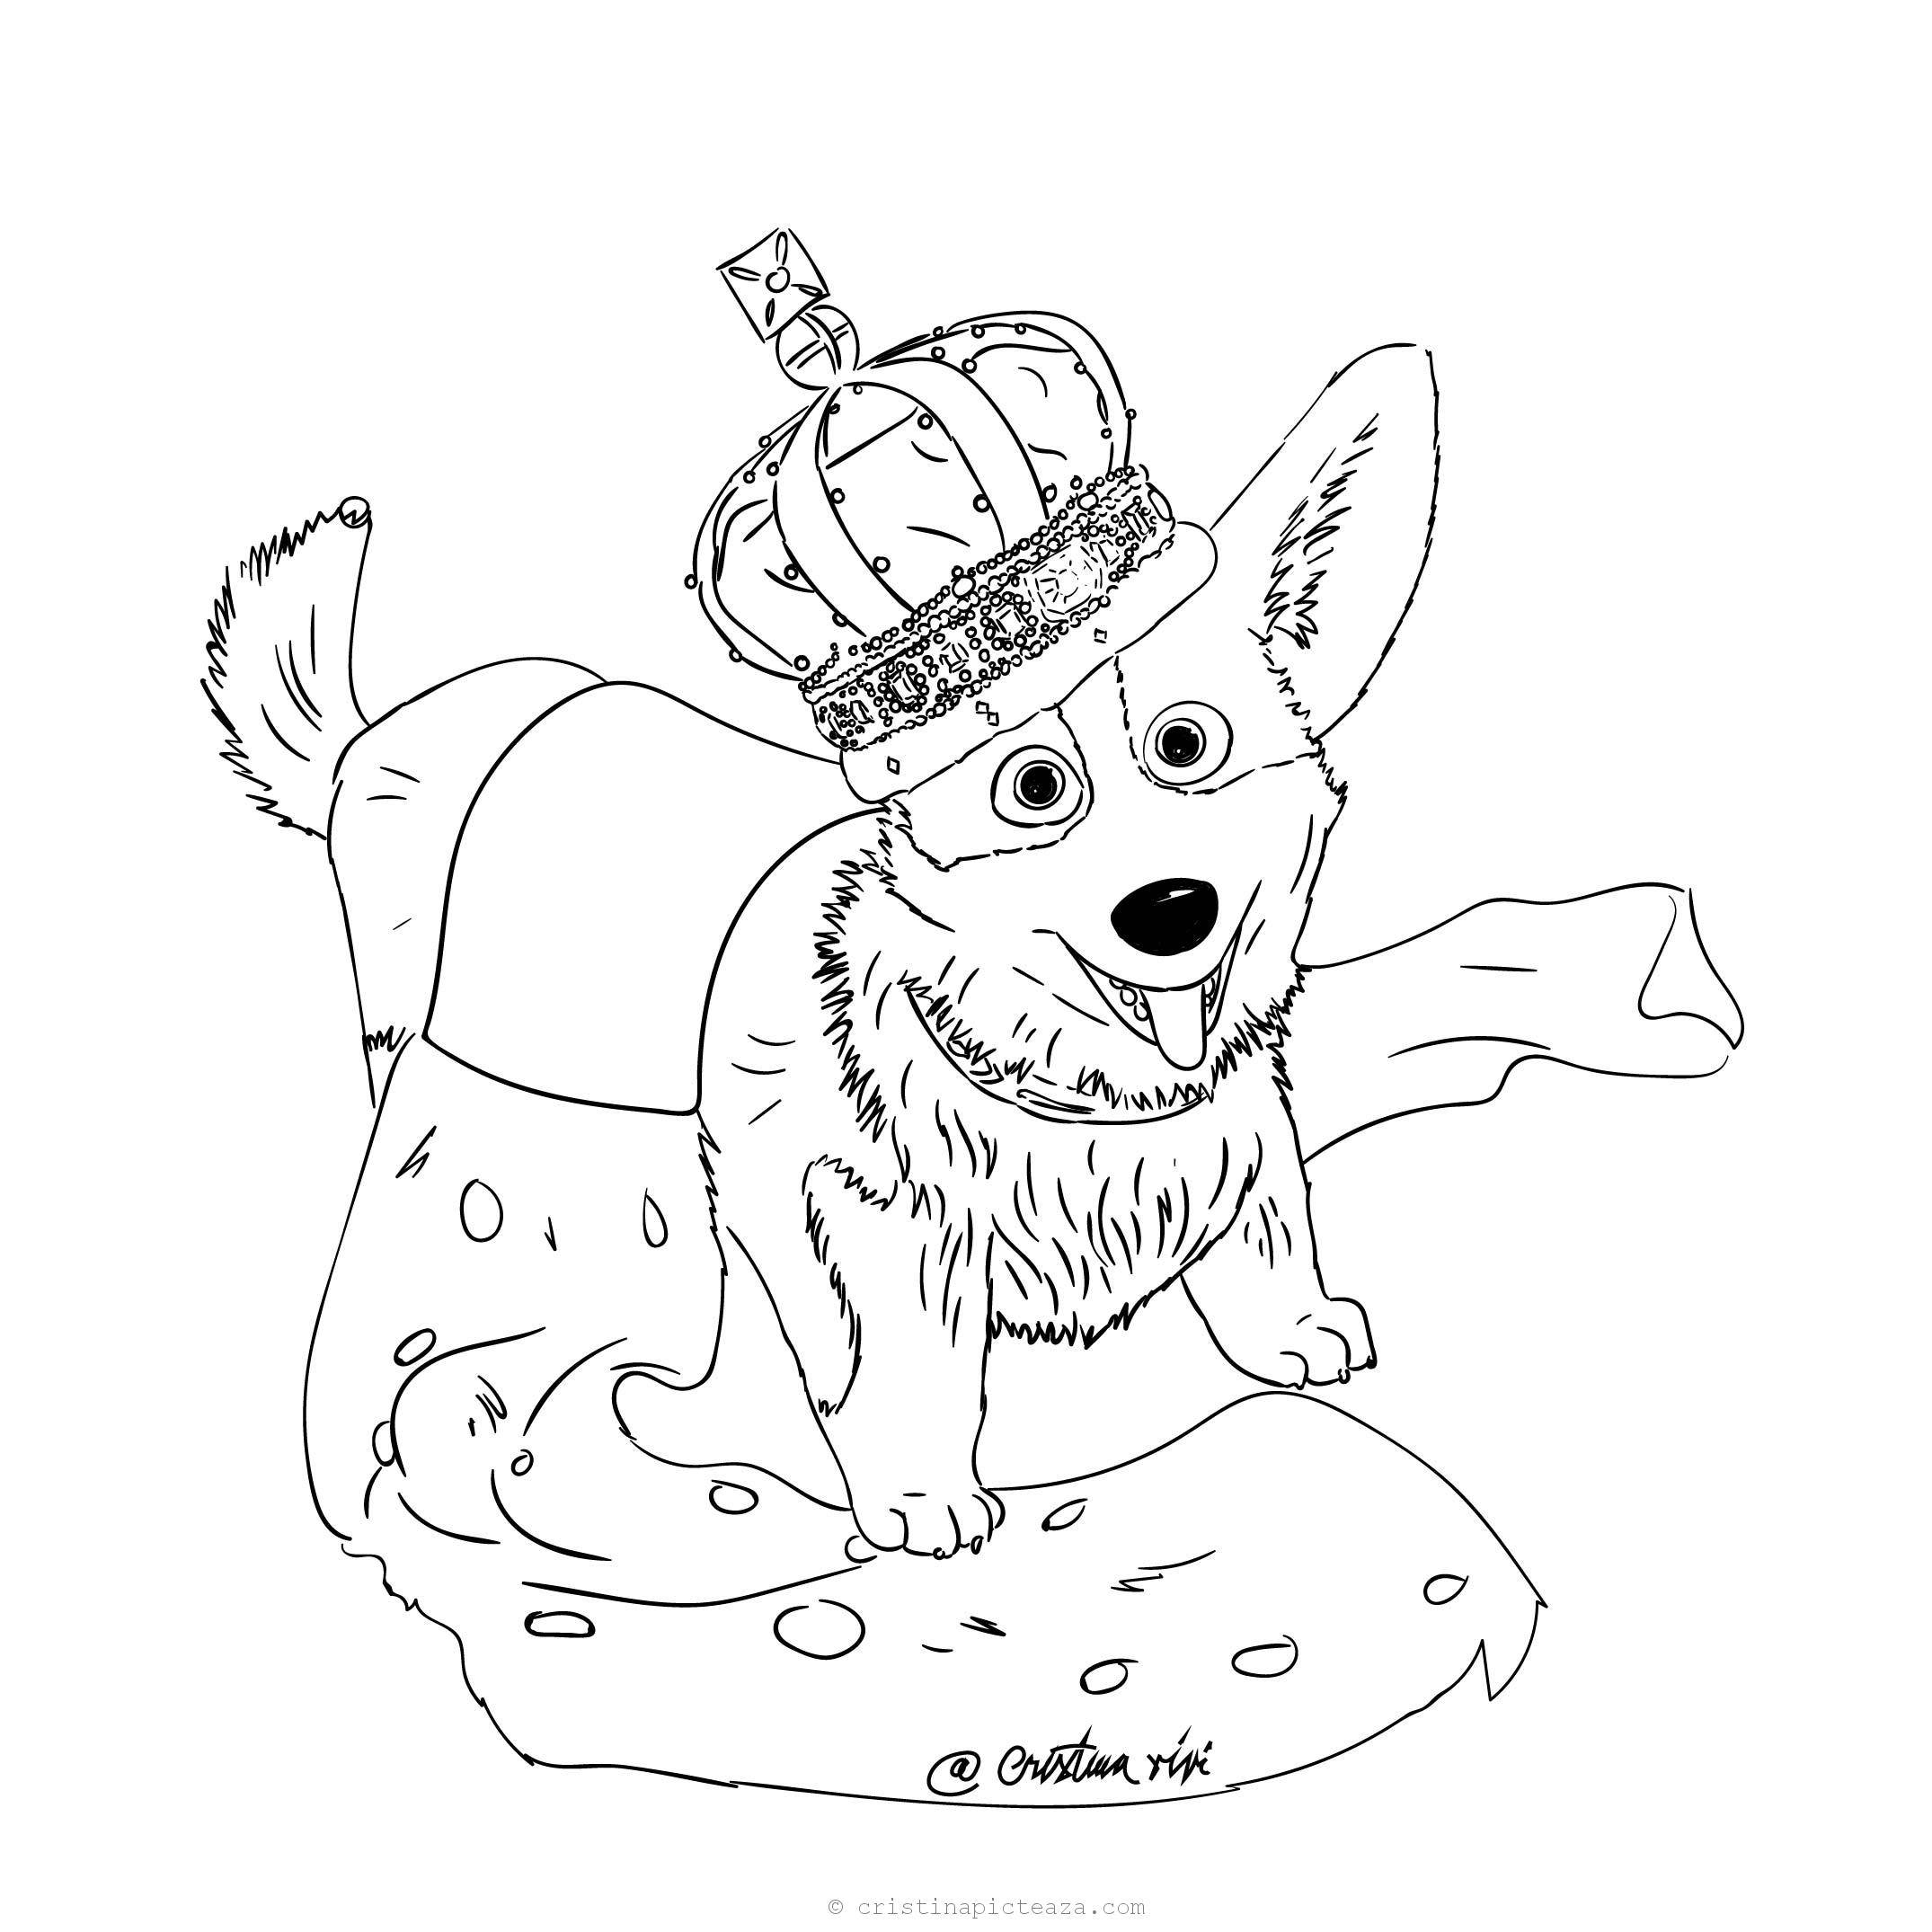 The queens corgi coloring pages â dog coloring pages